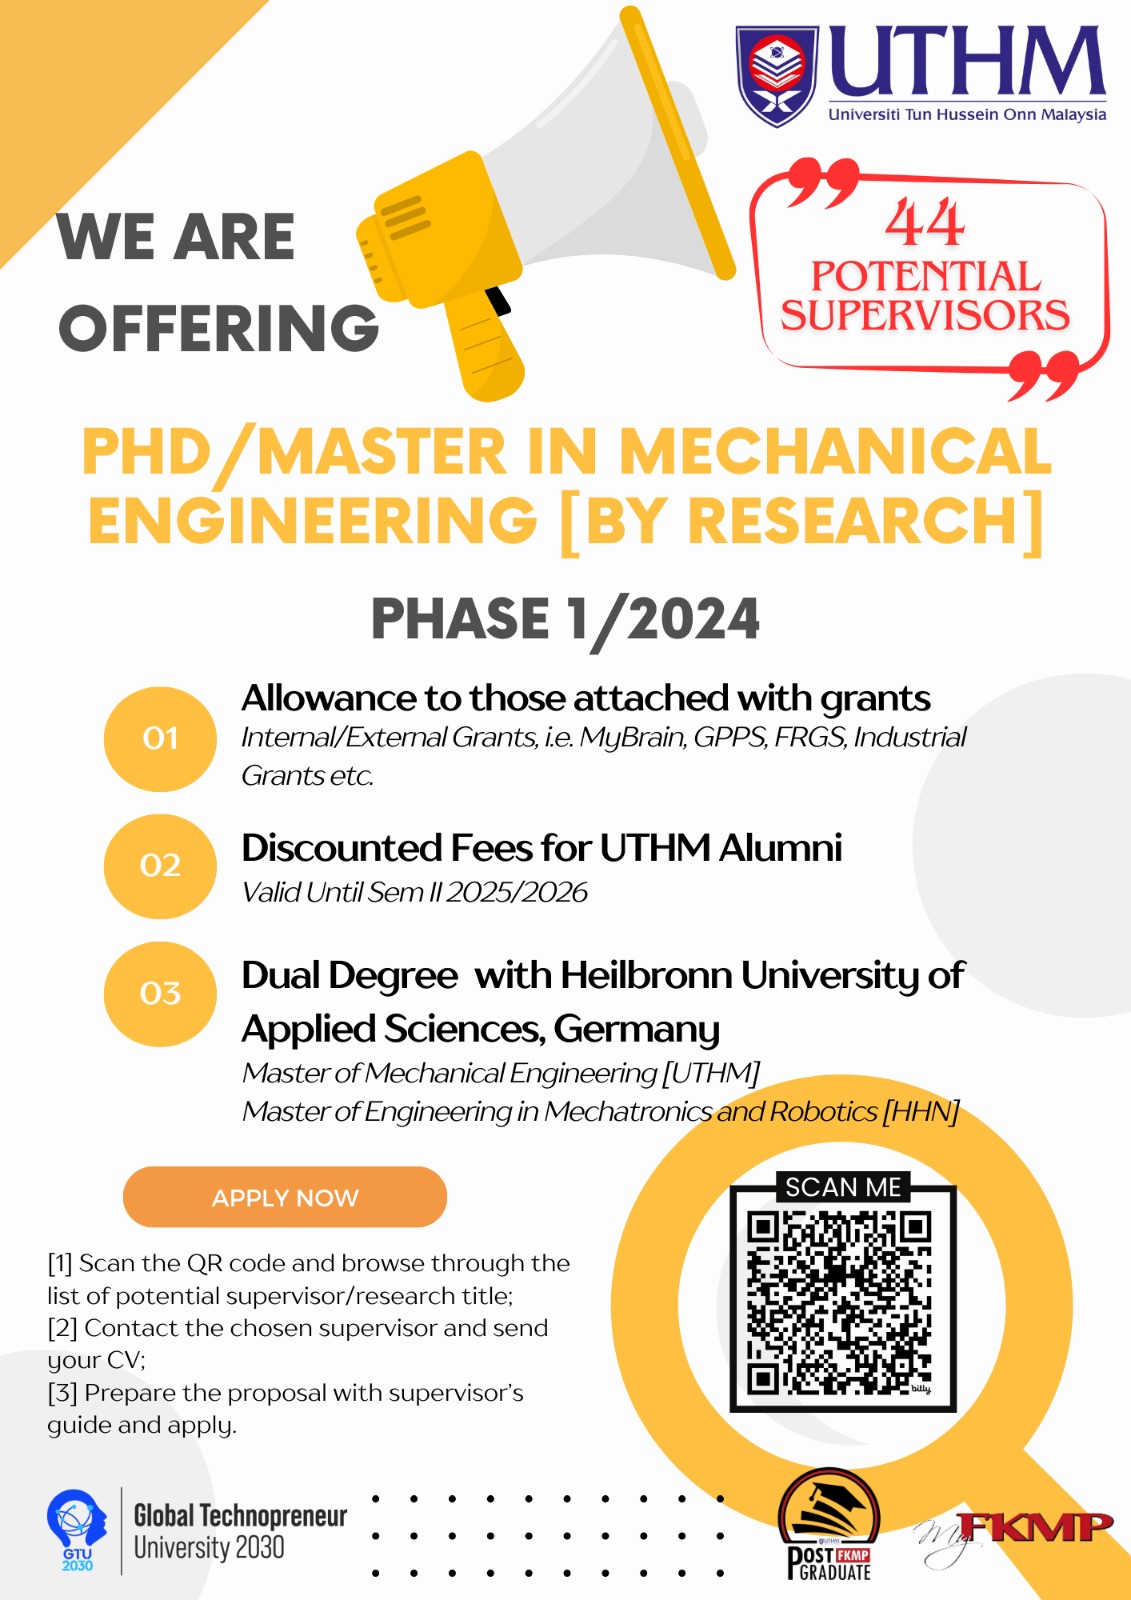 PHD/MASTER BY RESEARCH OPPORTUNITY